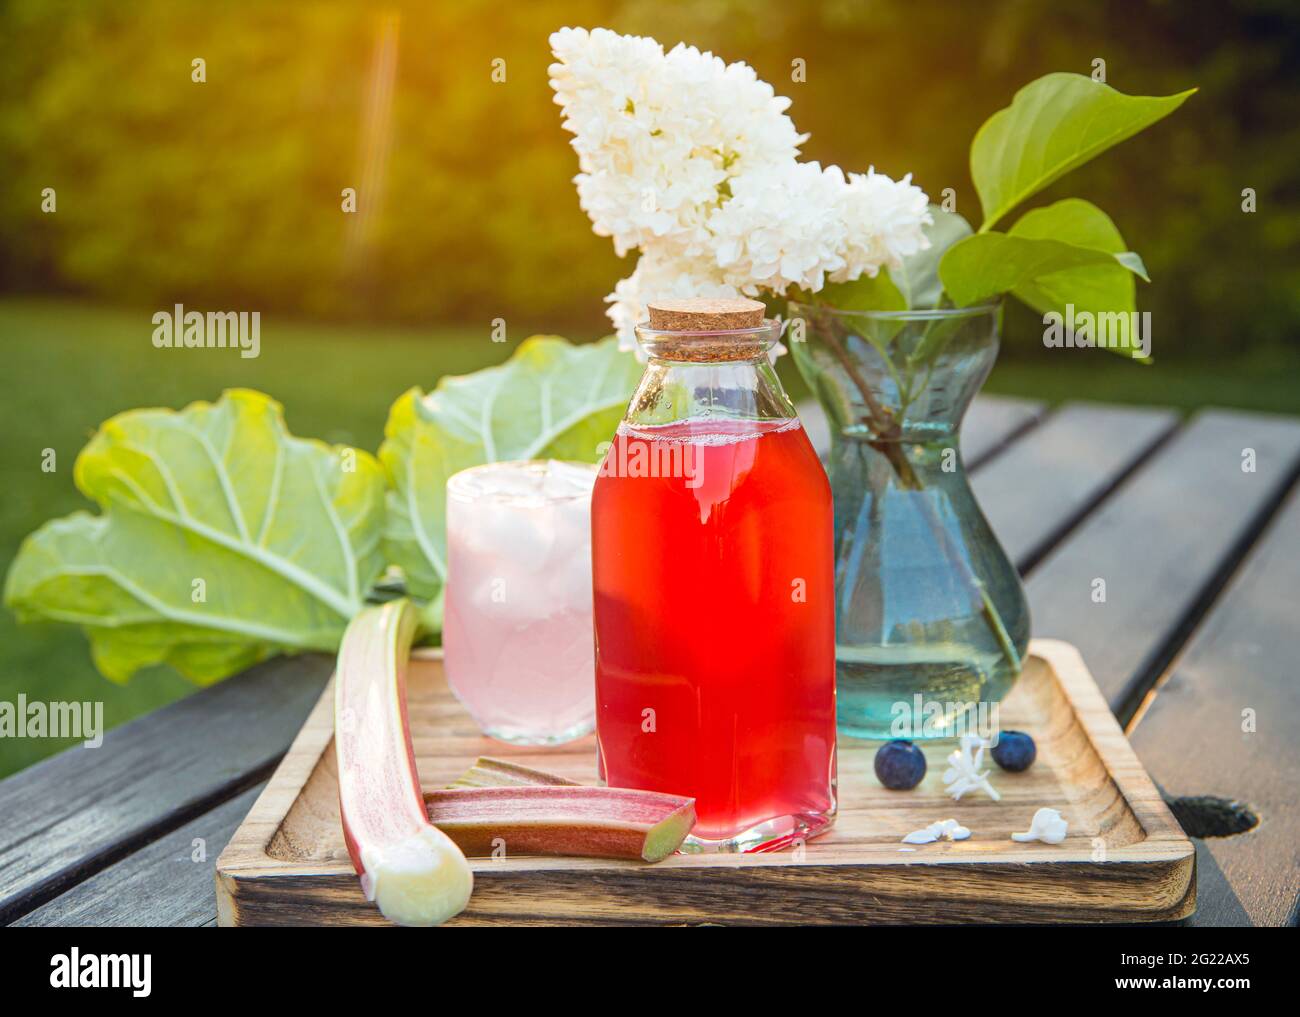 Homemade rhubarb syrup ( Rheum hybridum ). Nice pink liquid syrup in bottle and glass with juice and ice cubes in drinking glass on tray. Stock Photo